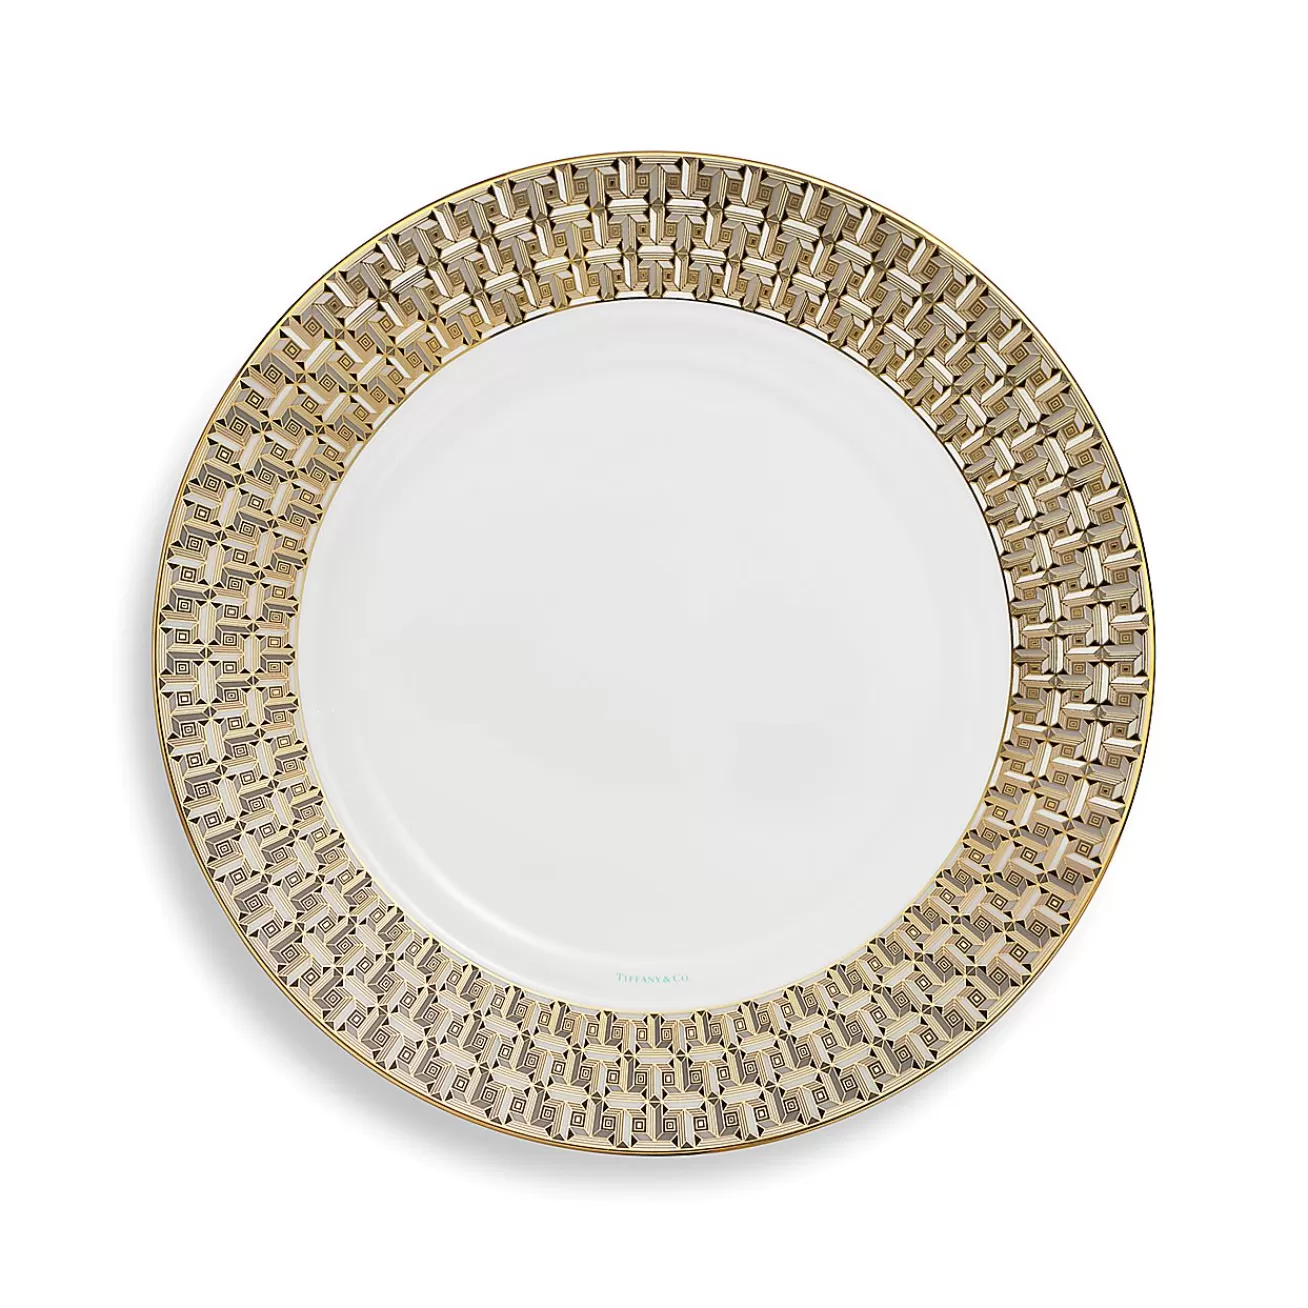 Tiffany & Co. Tiffany T True Dinner Plate with a Hand-painted Gold Rim | ^ Tableware